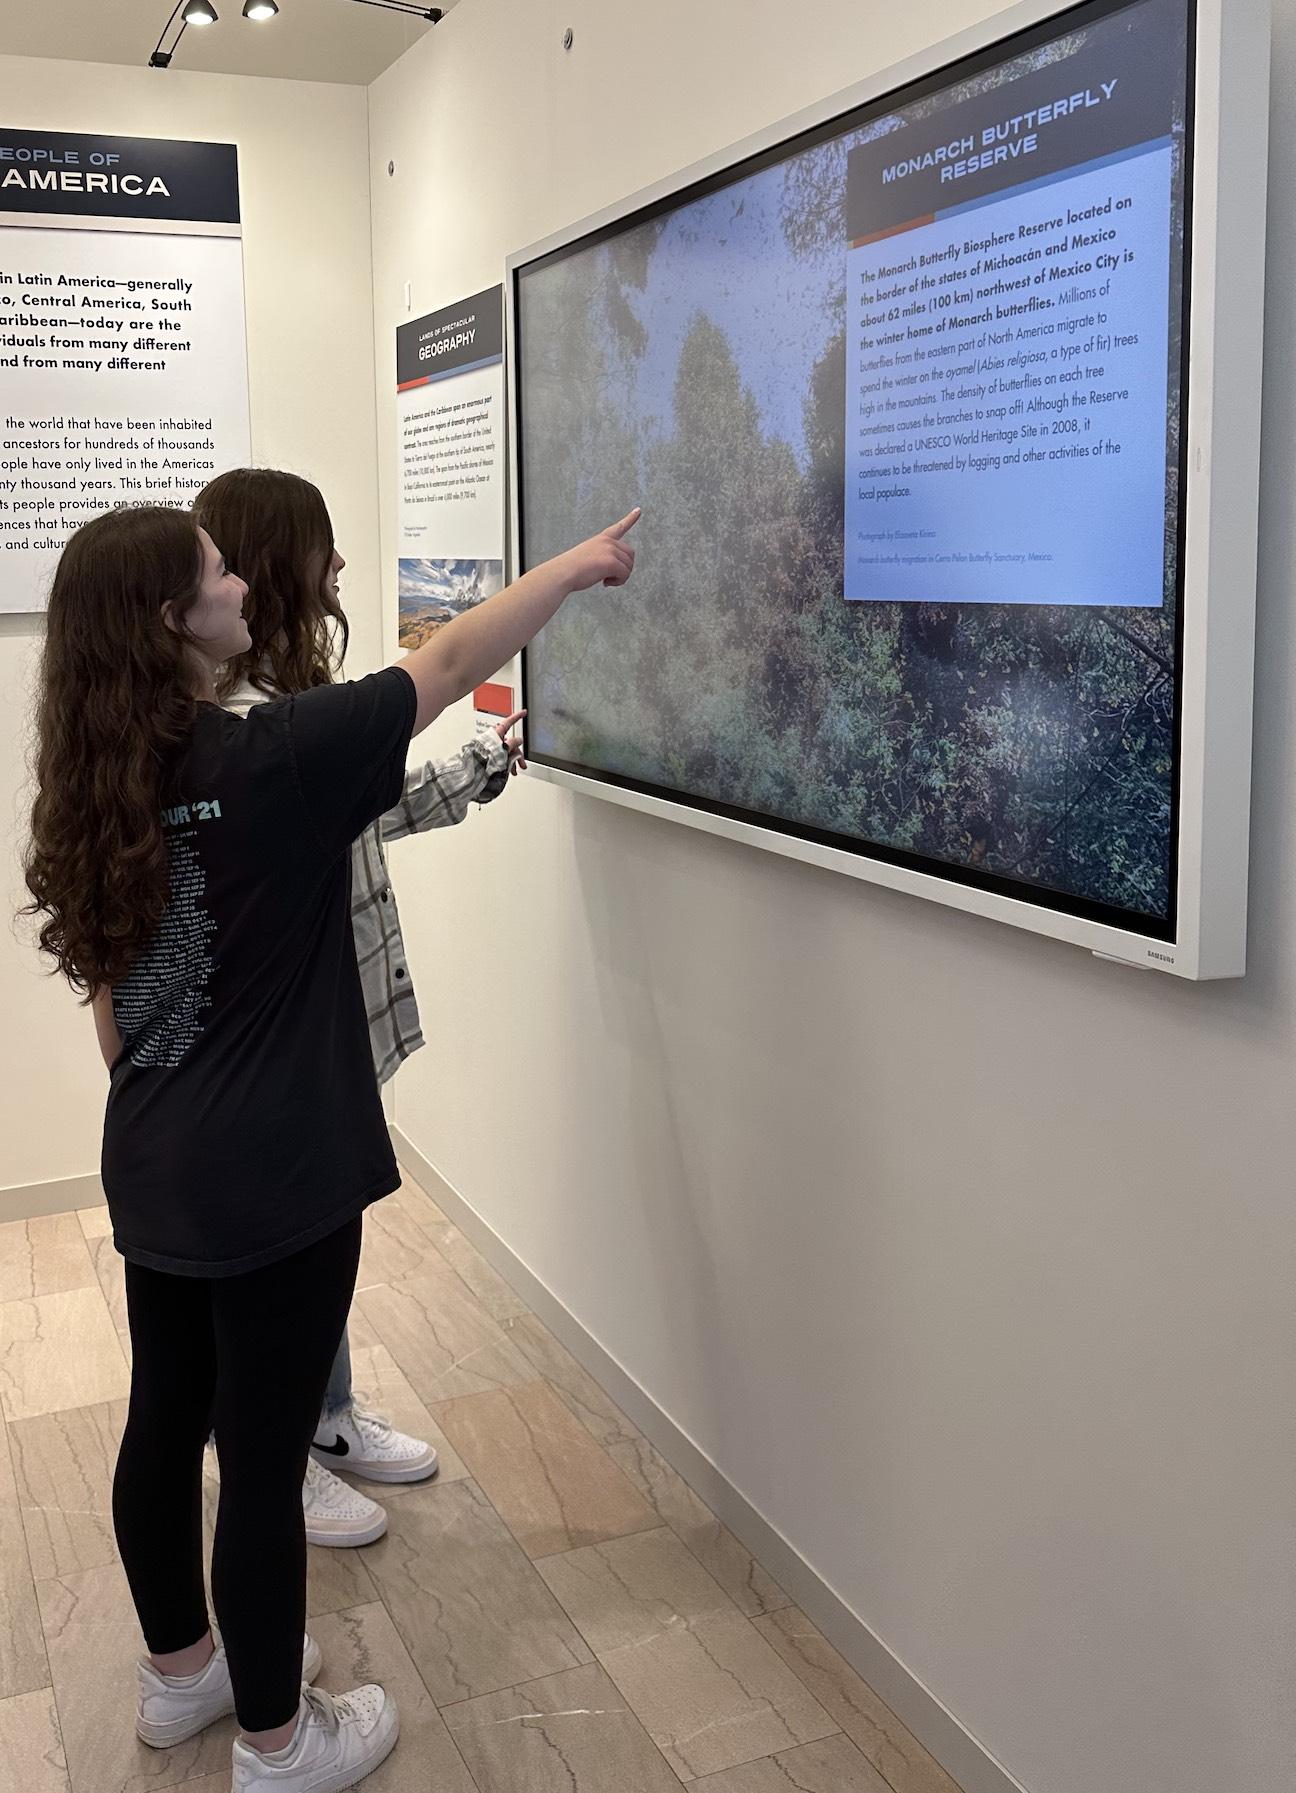 11th-graders Carlee Valenta and Madelyn Alexander pause at one of the exhibits